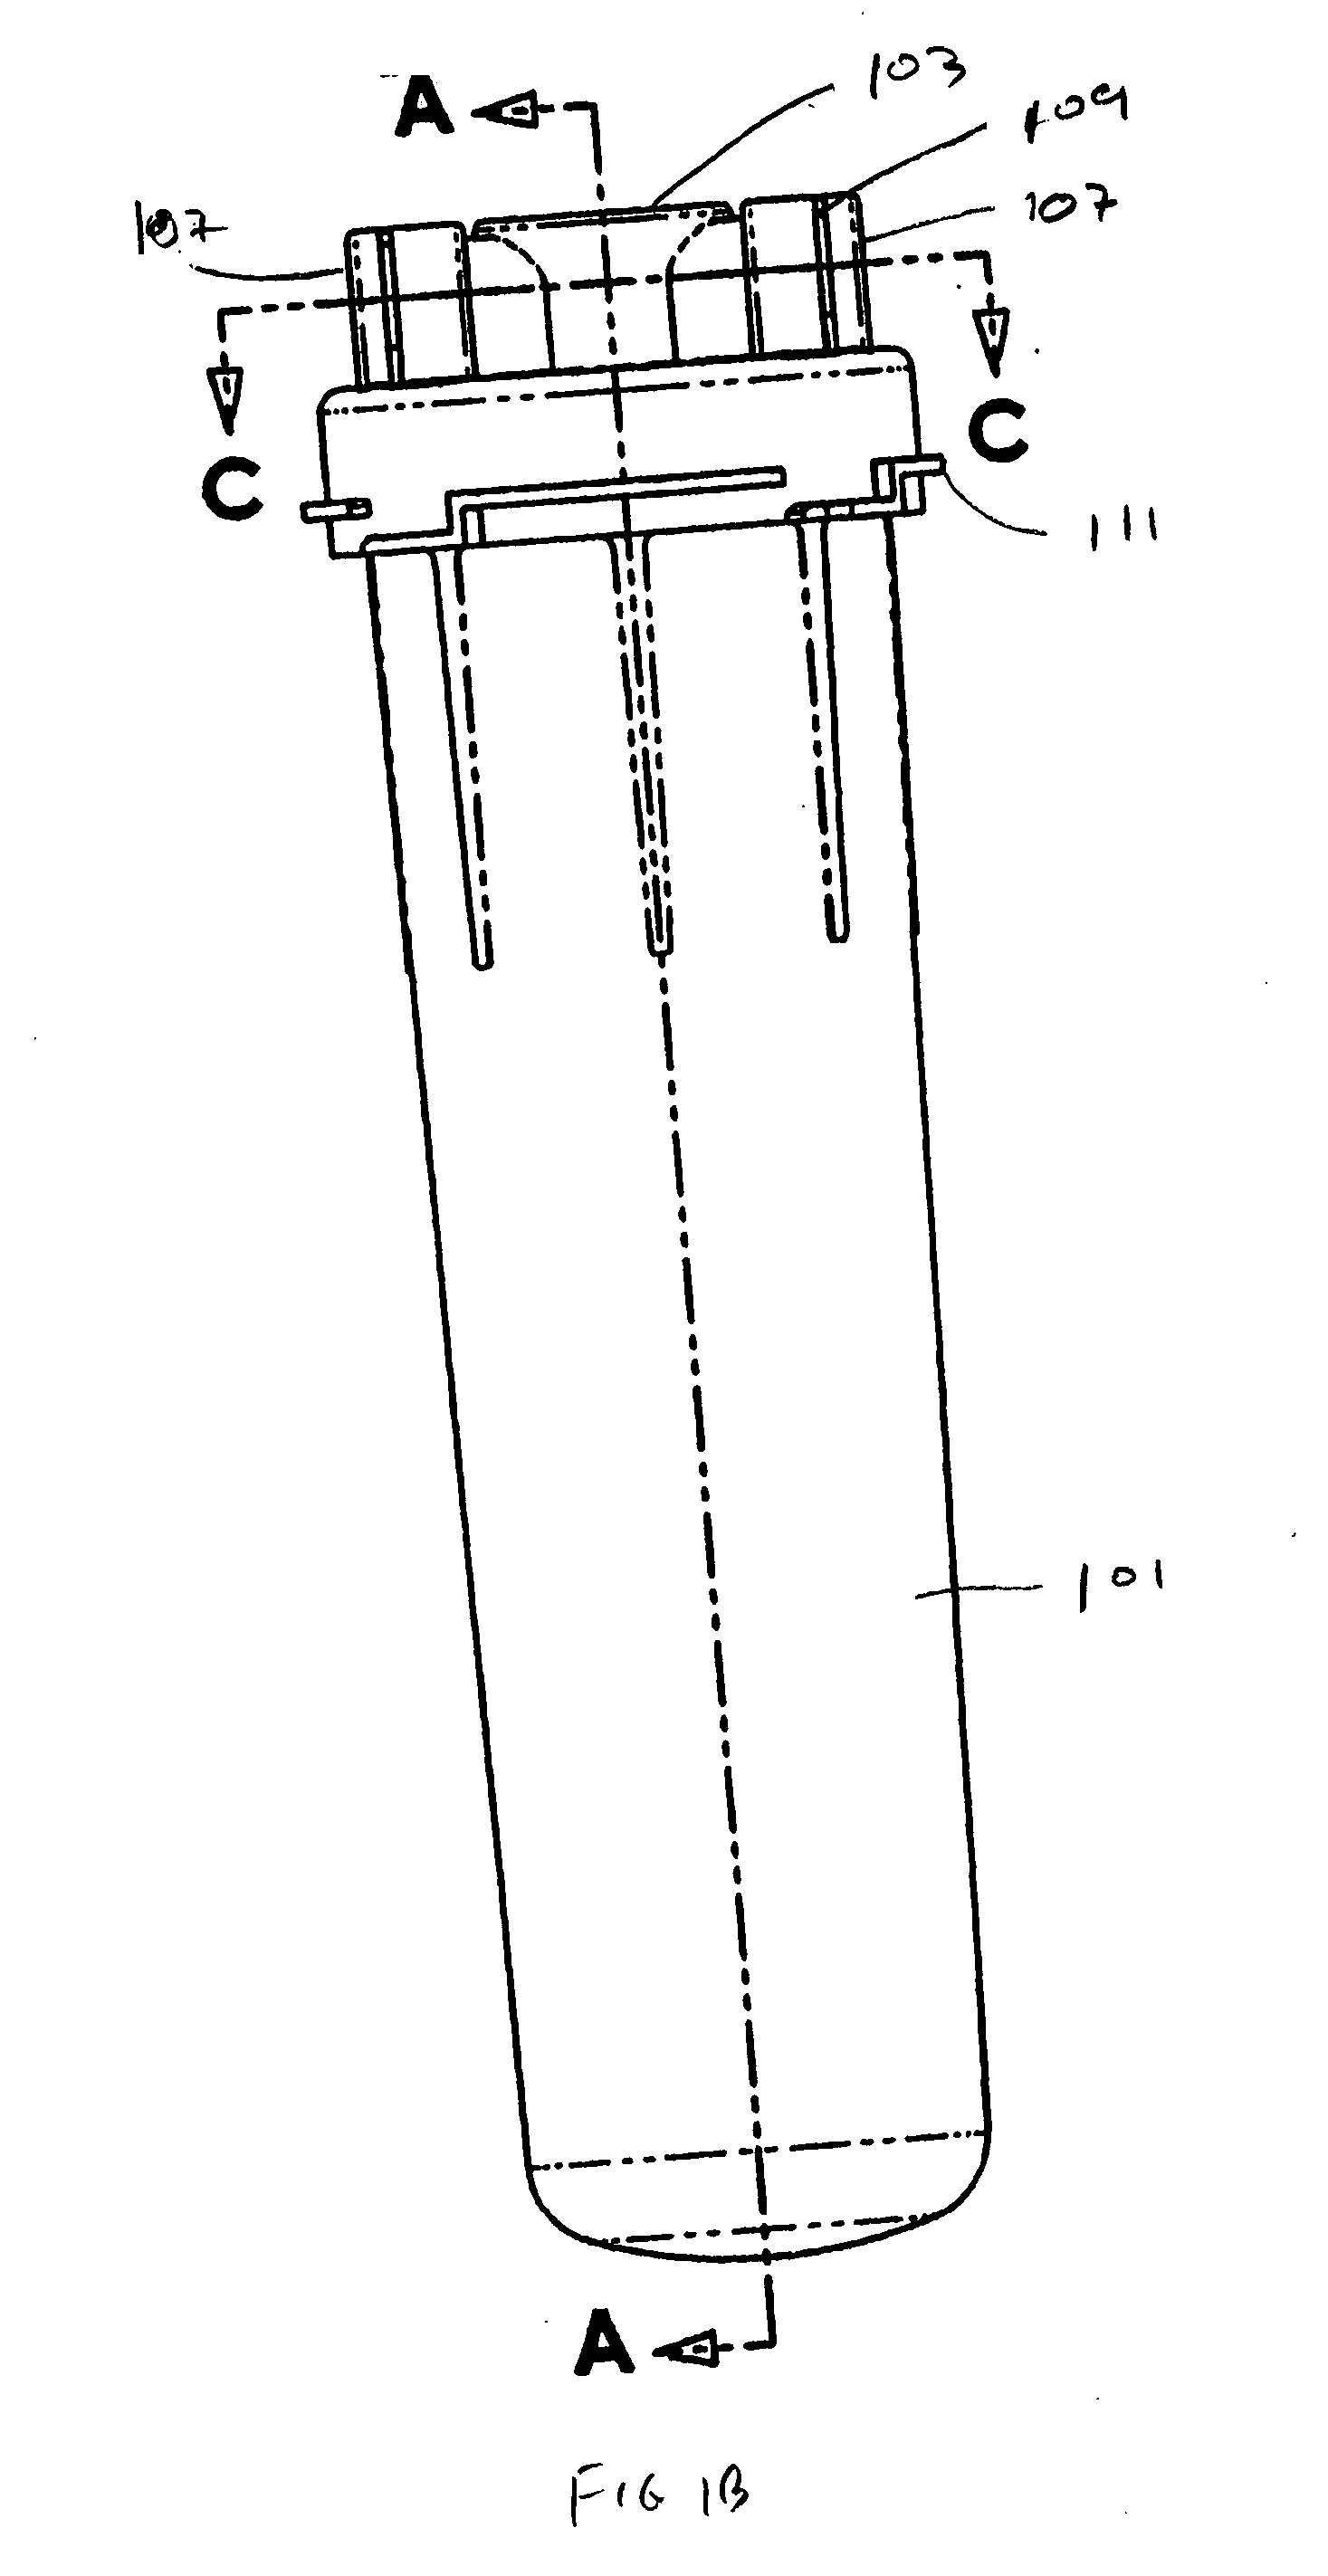 Modular fluid purification system and components thereof